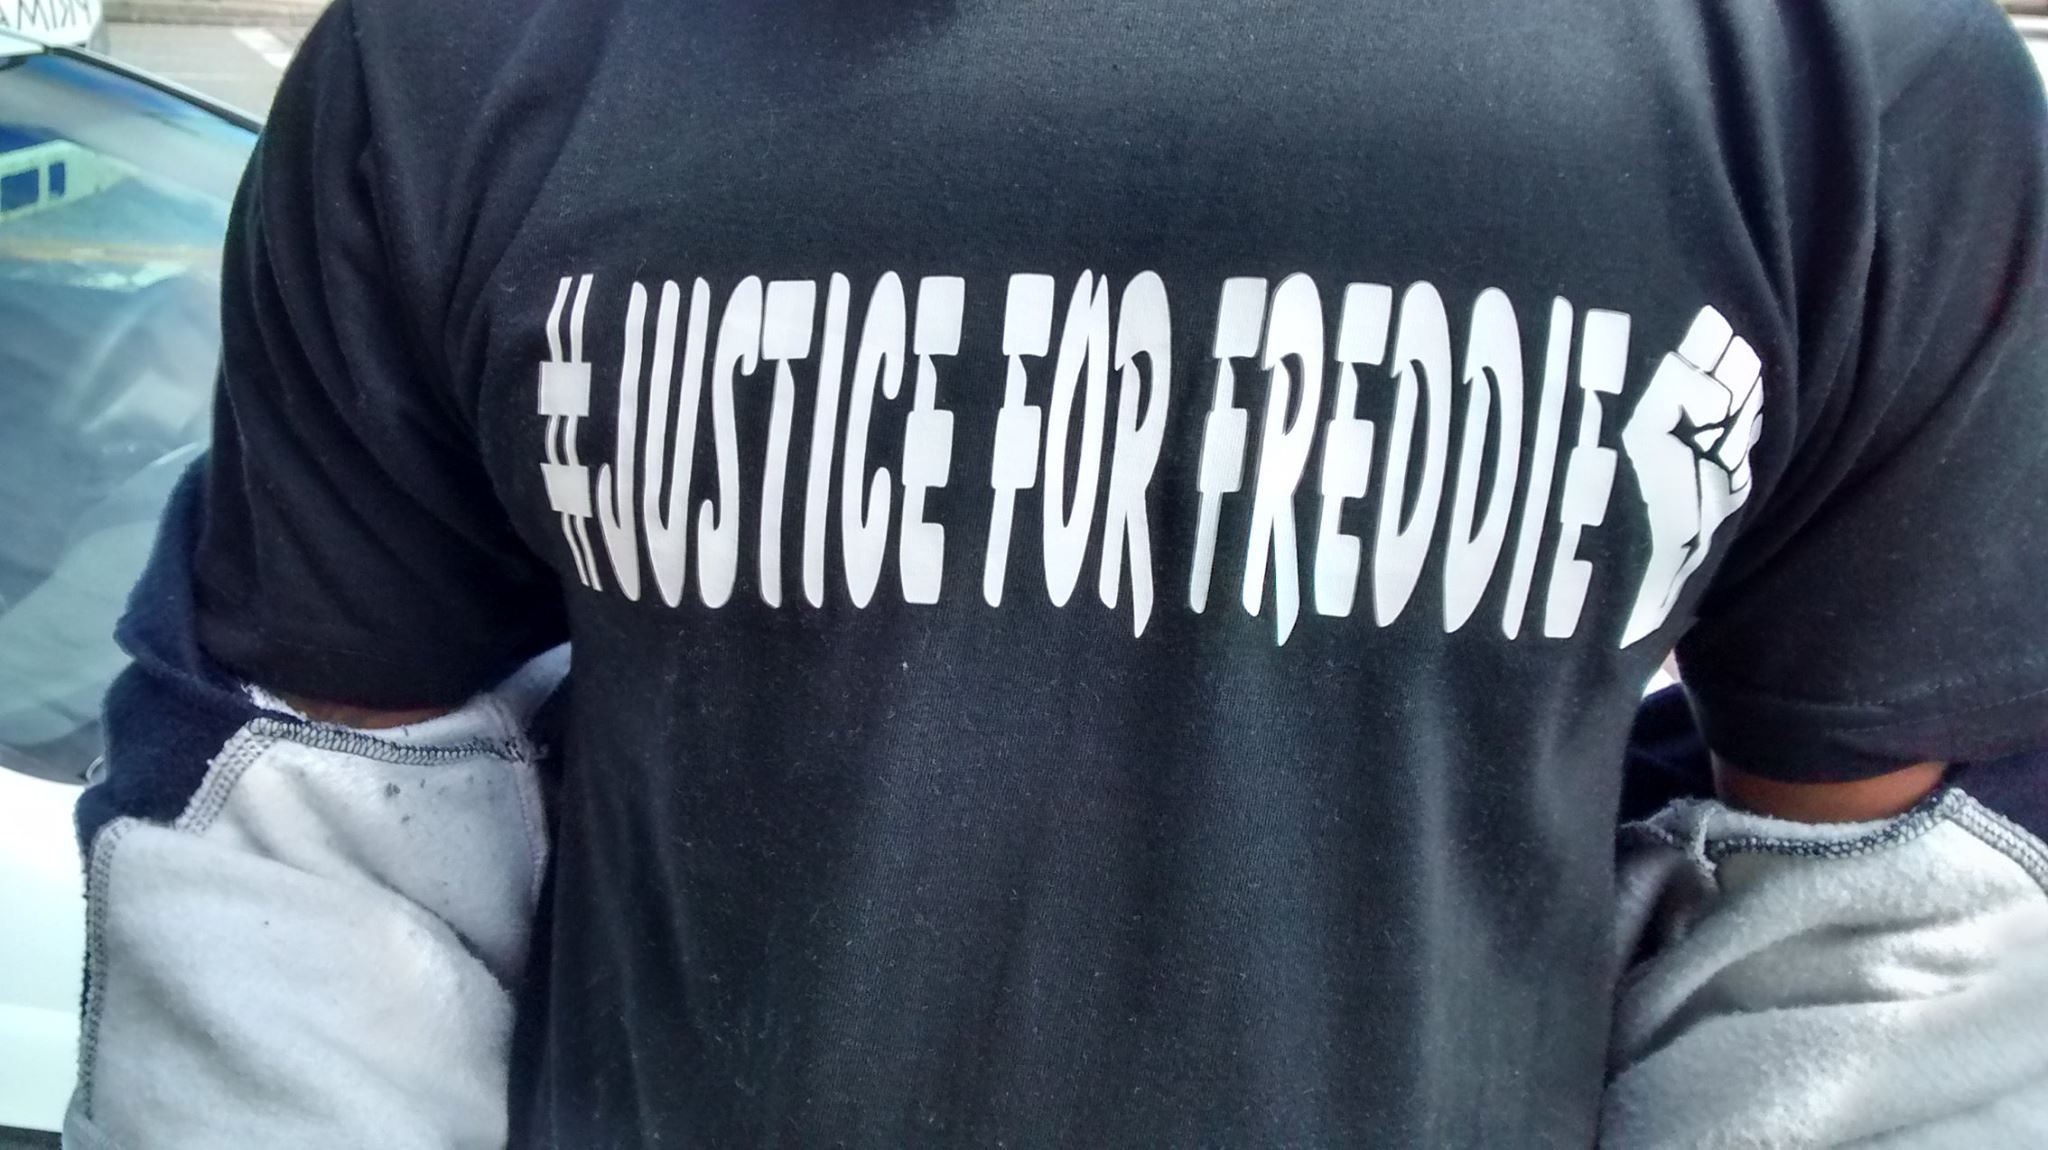 The call for justice for Freddie Gray on May Day in the U.S.